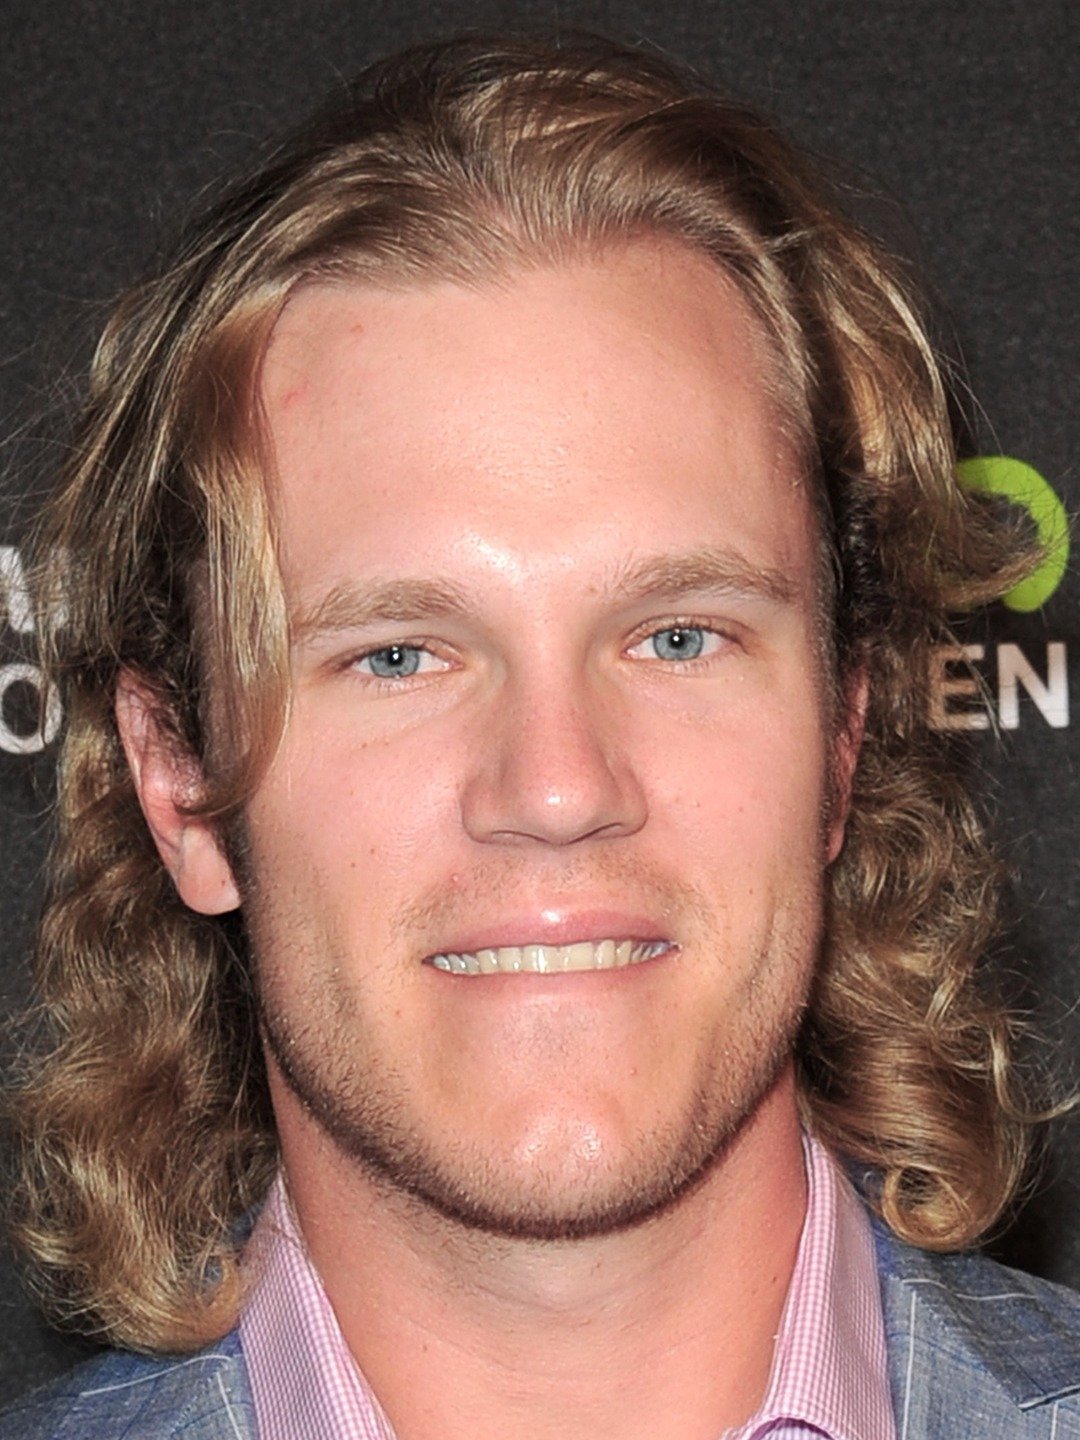 Noah Syndergaard finally lets his hair back down, instantly morphs